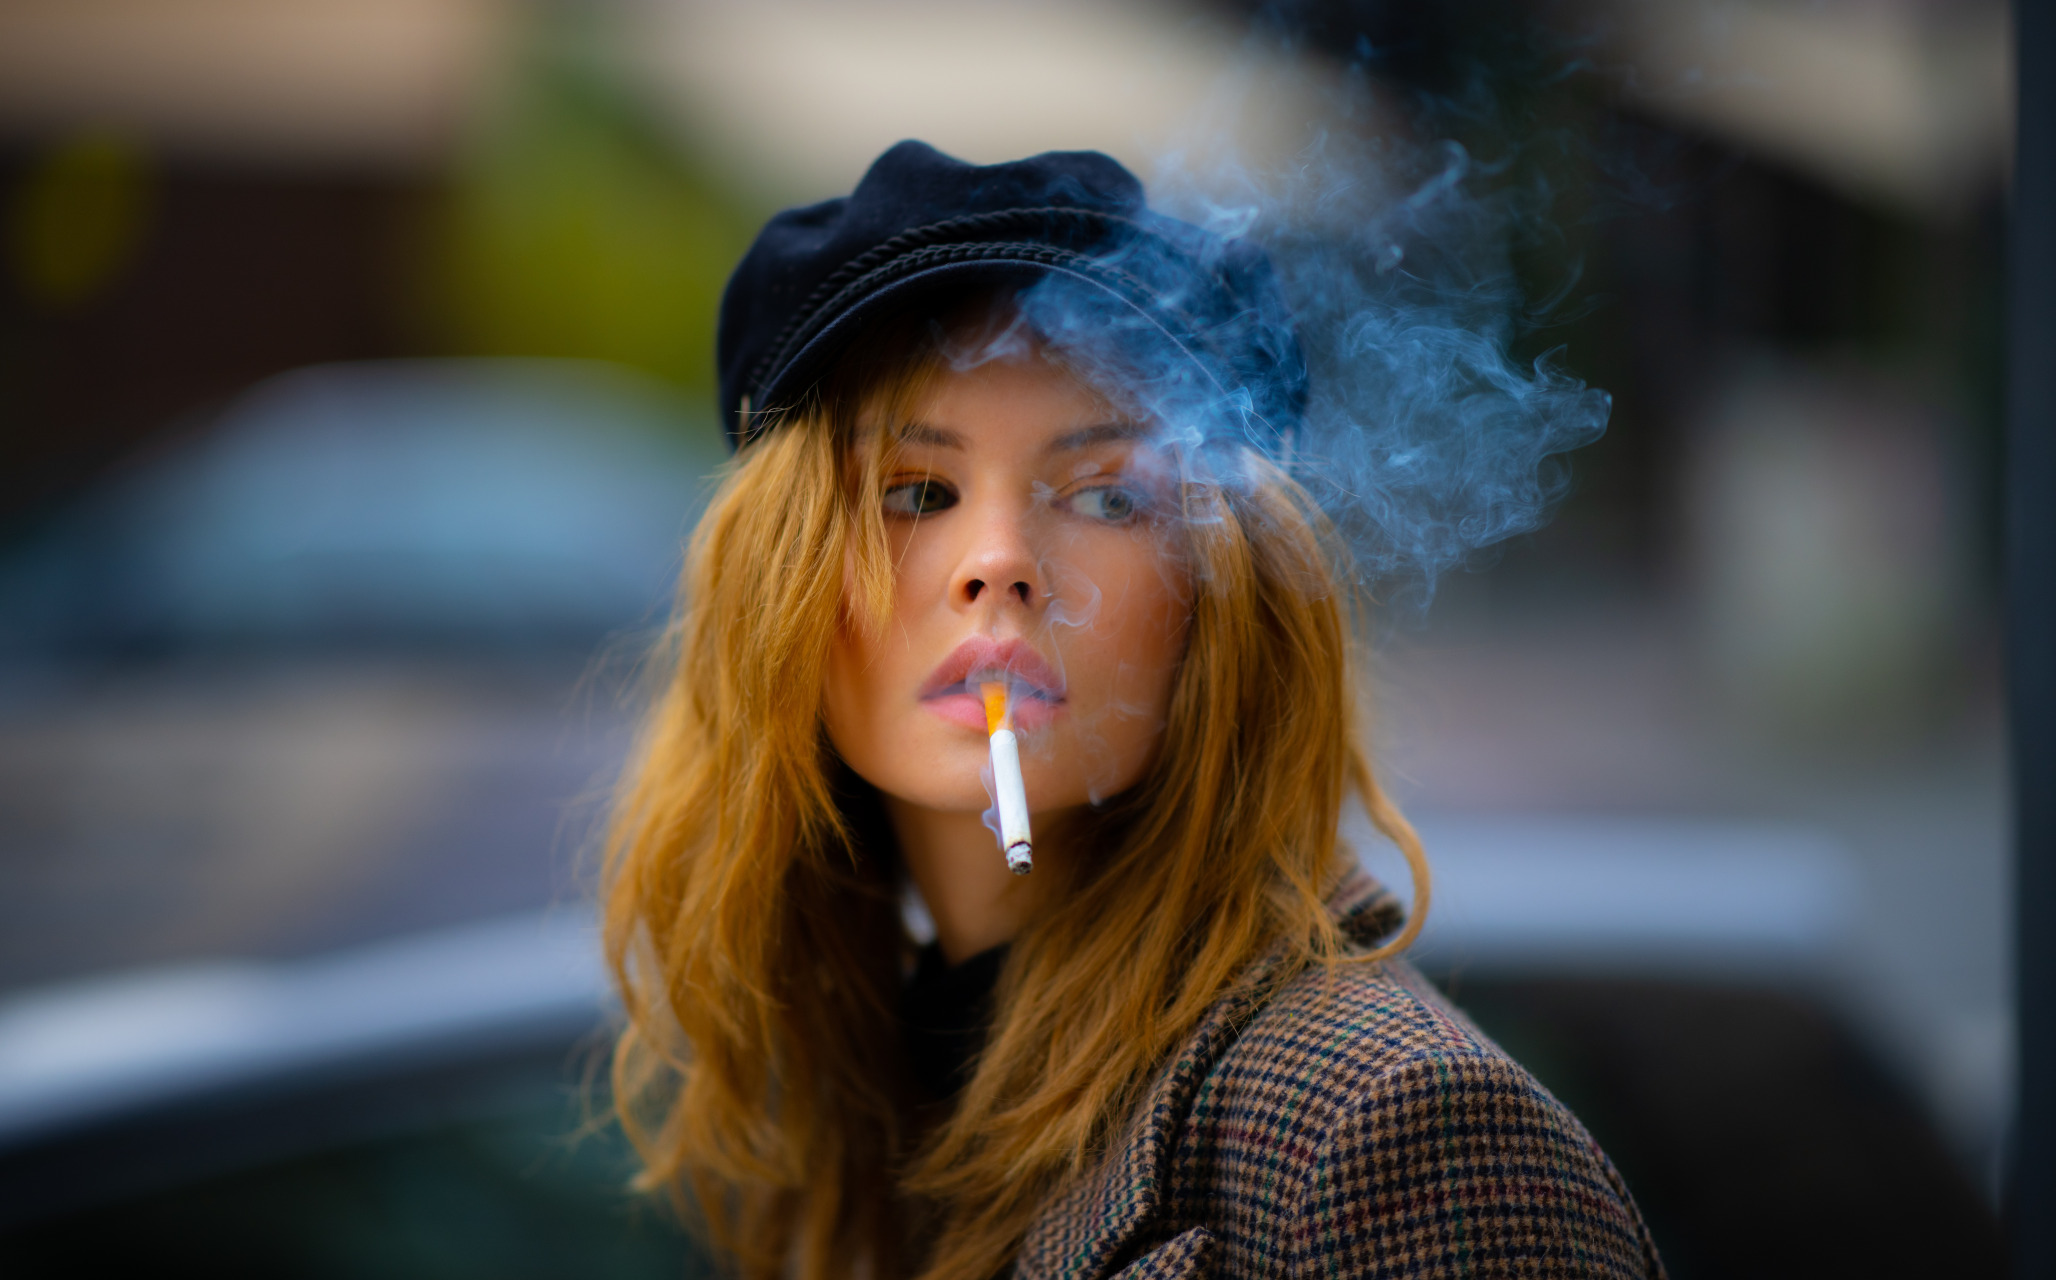 Model Looking Away Women Cigarettes Smoking Depth Of Field Photography Black Cap Blonde Looking At T 2056x1280